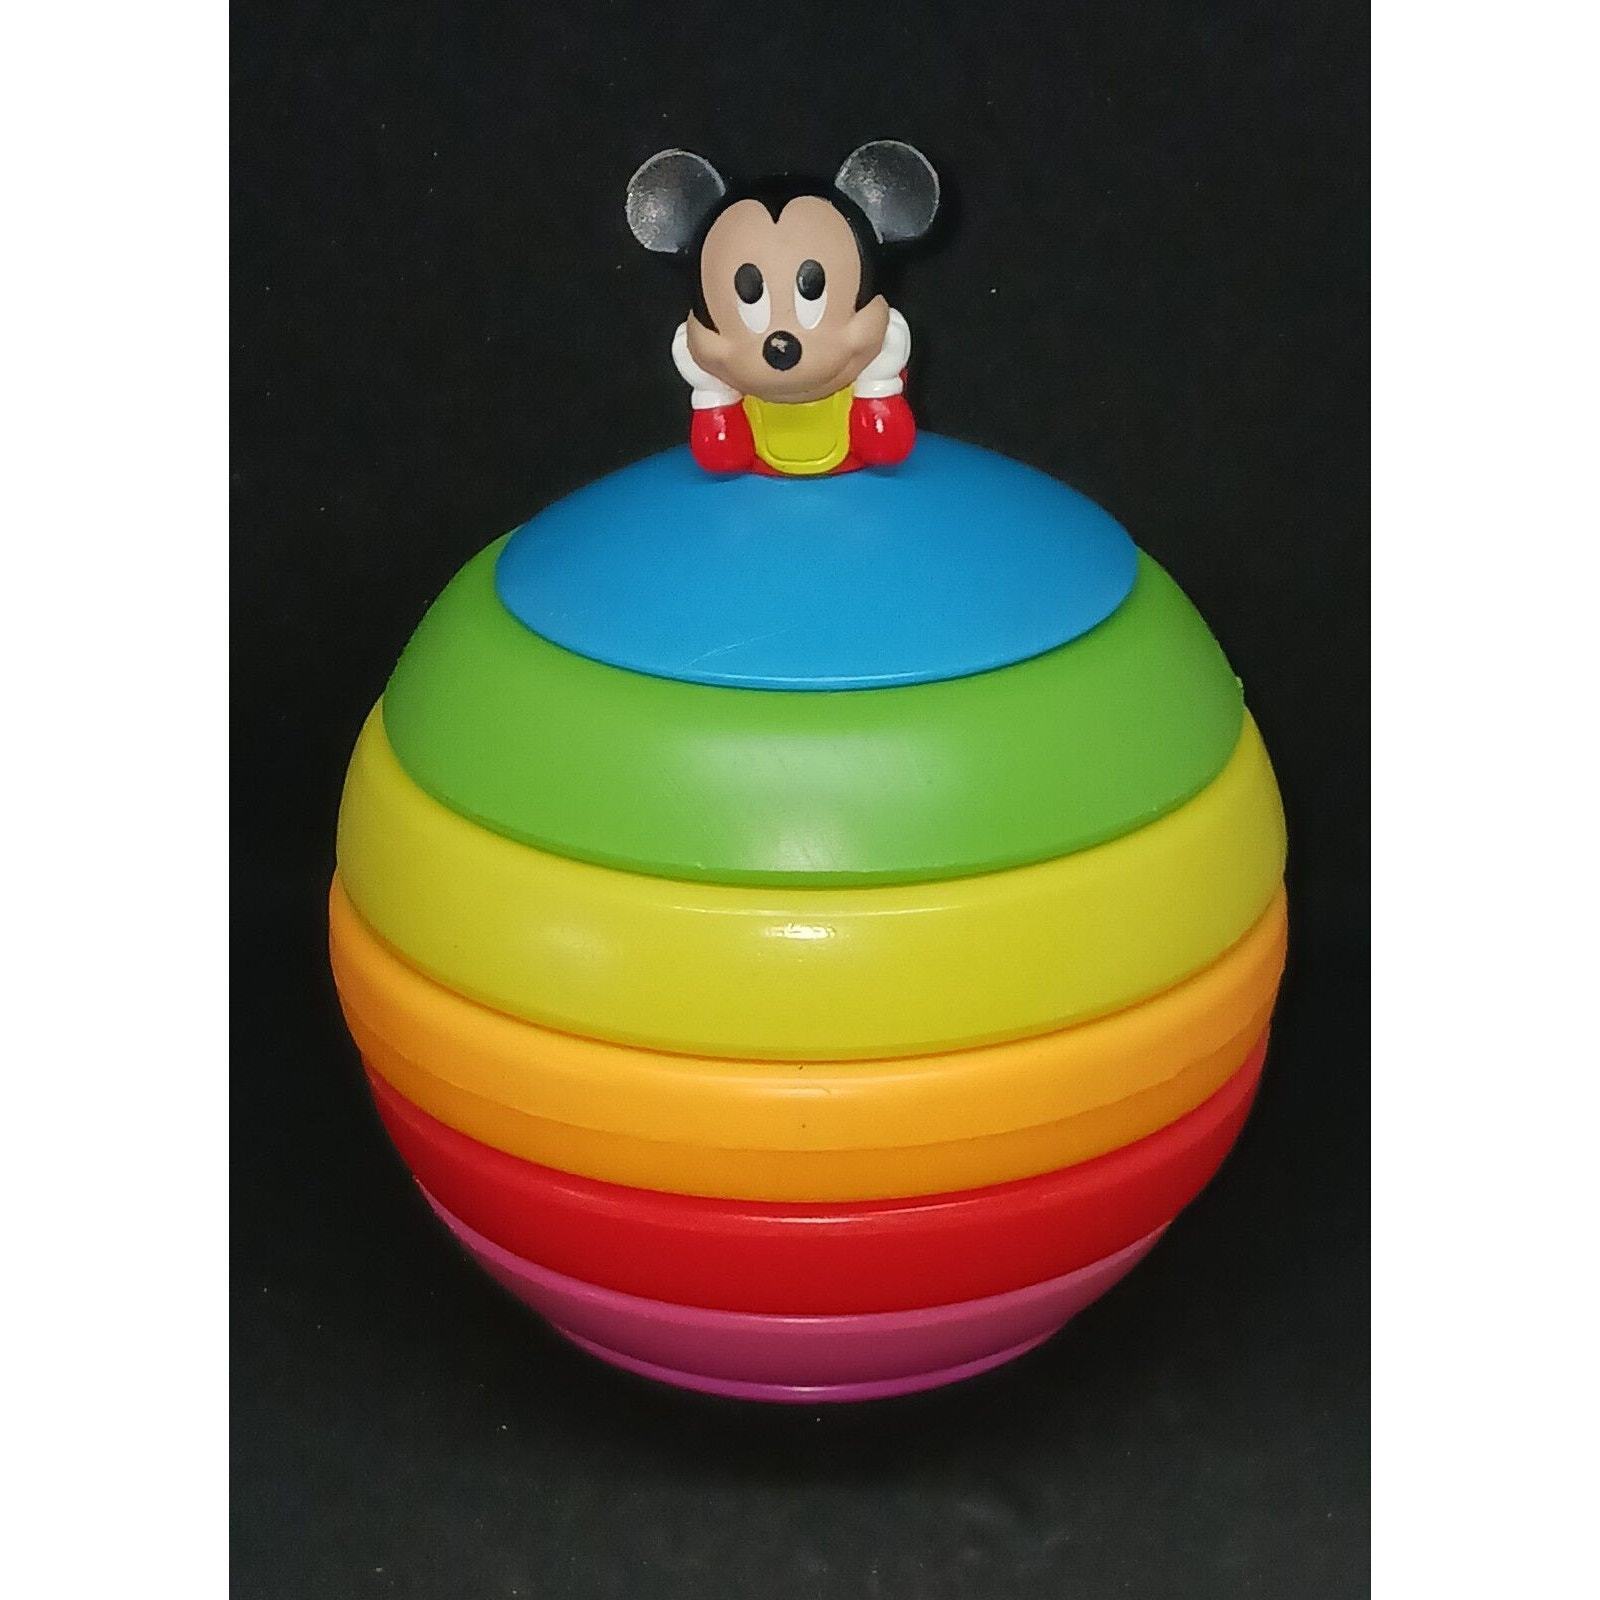 1988 Disney STACK-A-BALL Roly Poly Mickey Mouse Toy Vintage Mattel 5243